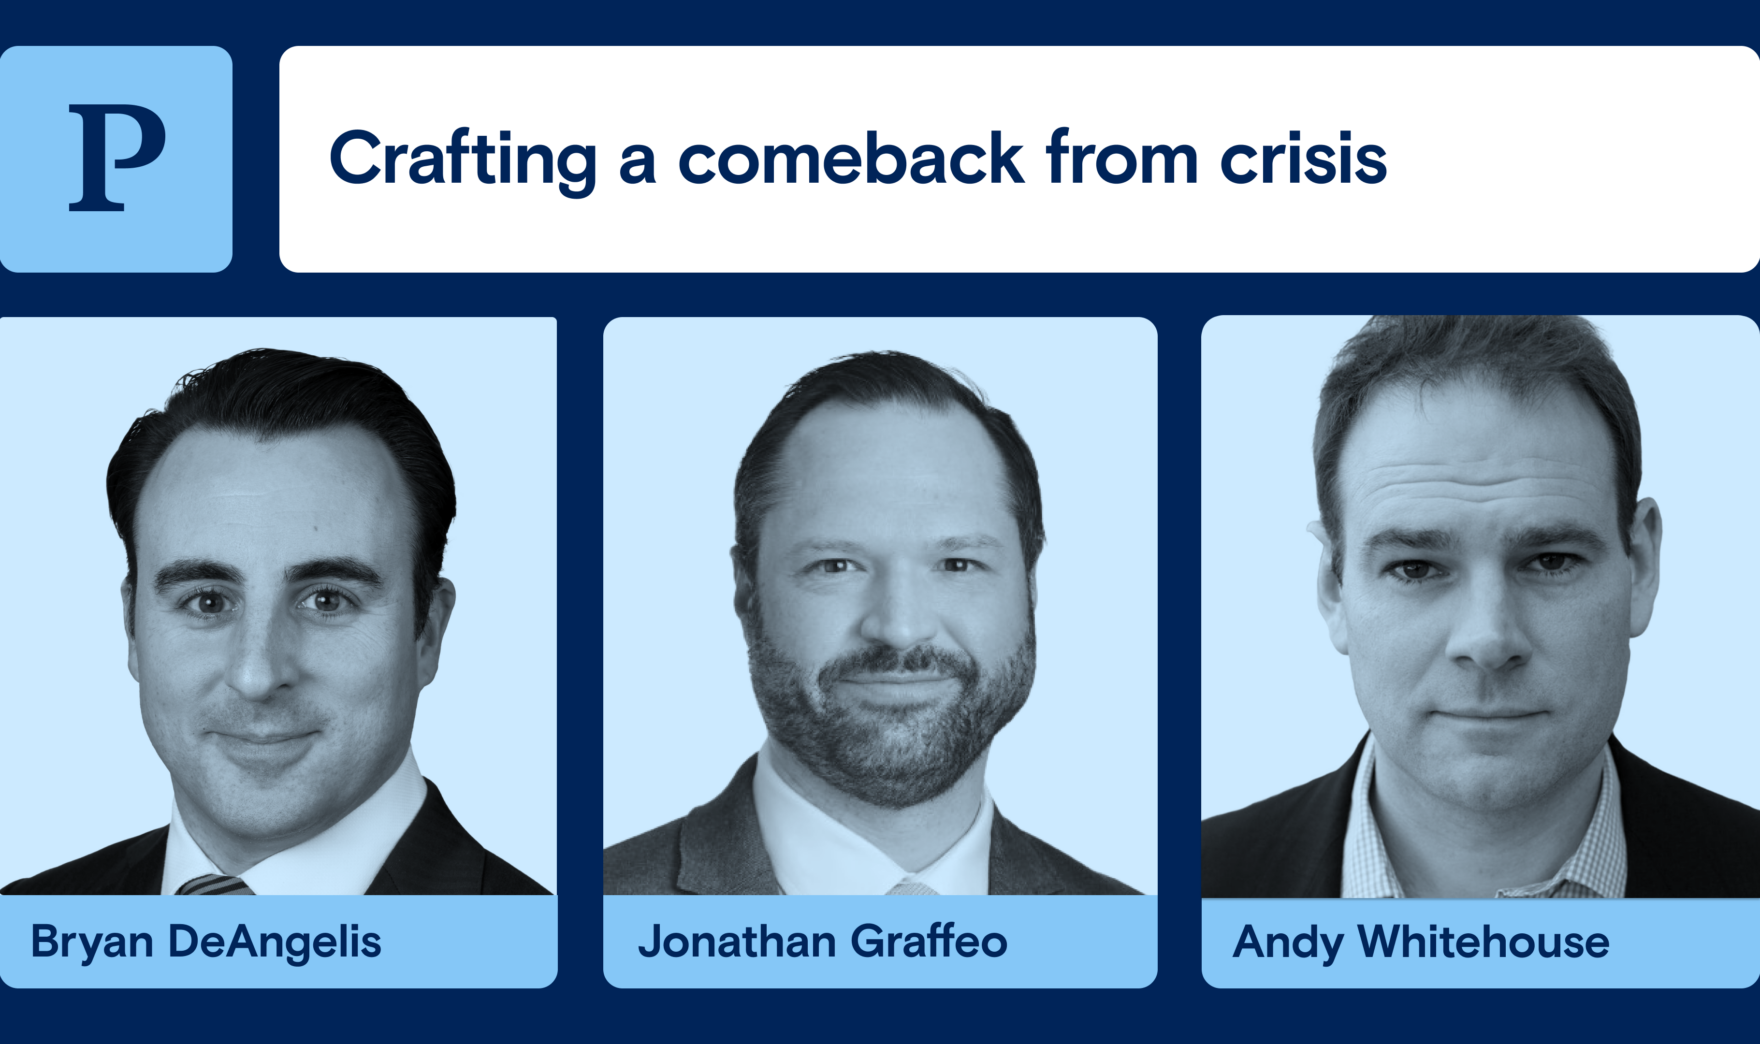 Crafting a comeback from crisis